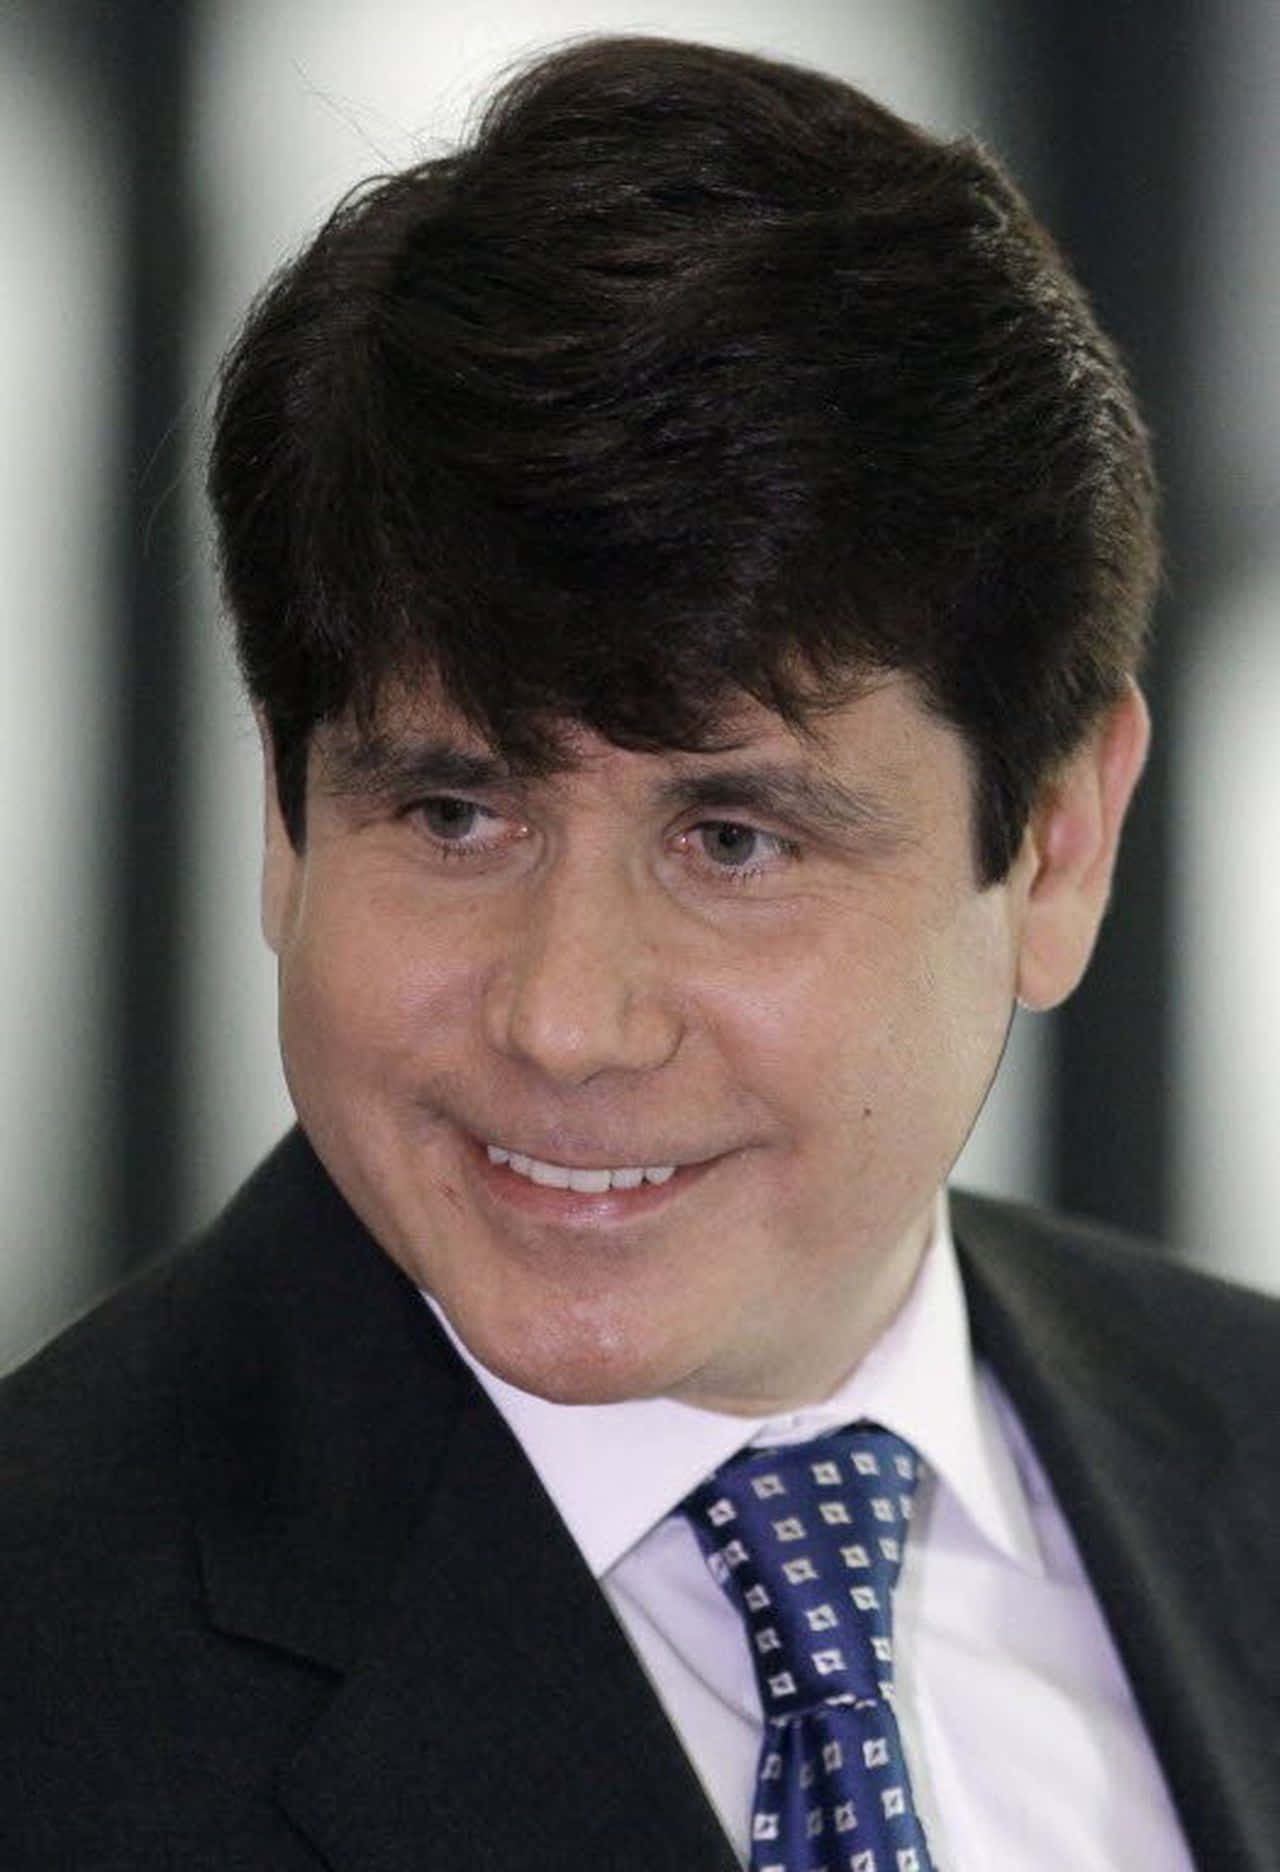 Rodblagojevich Sidoblick - (this Is A Direct Translation, But If We're Talking About A Computer Or Mobile Wallpaper, It Might Be Better To Say) Sidoblick Från Rod Blagojevich. Wallpaper